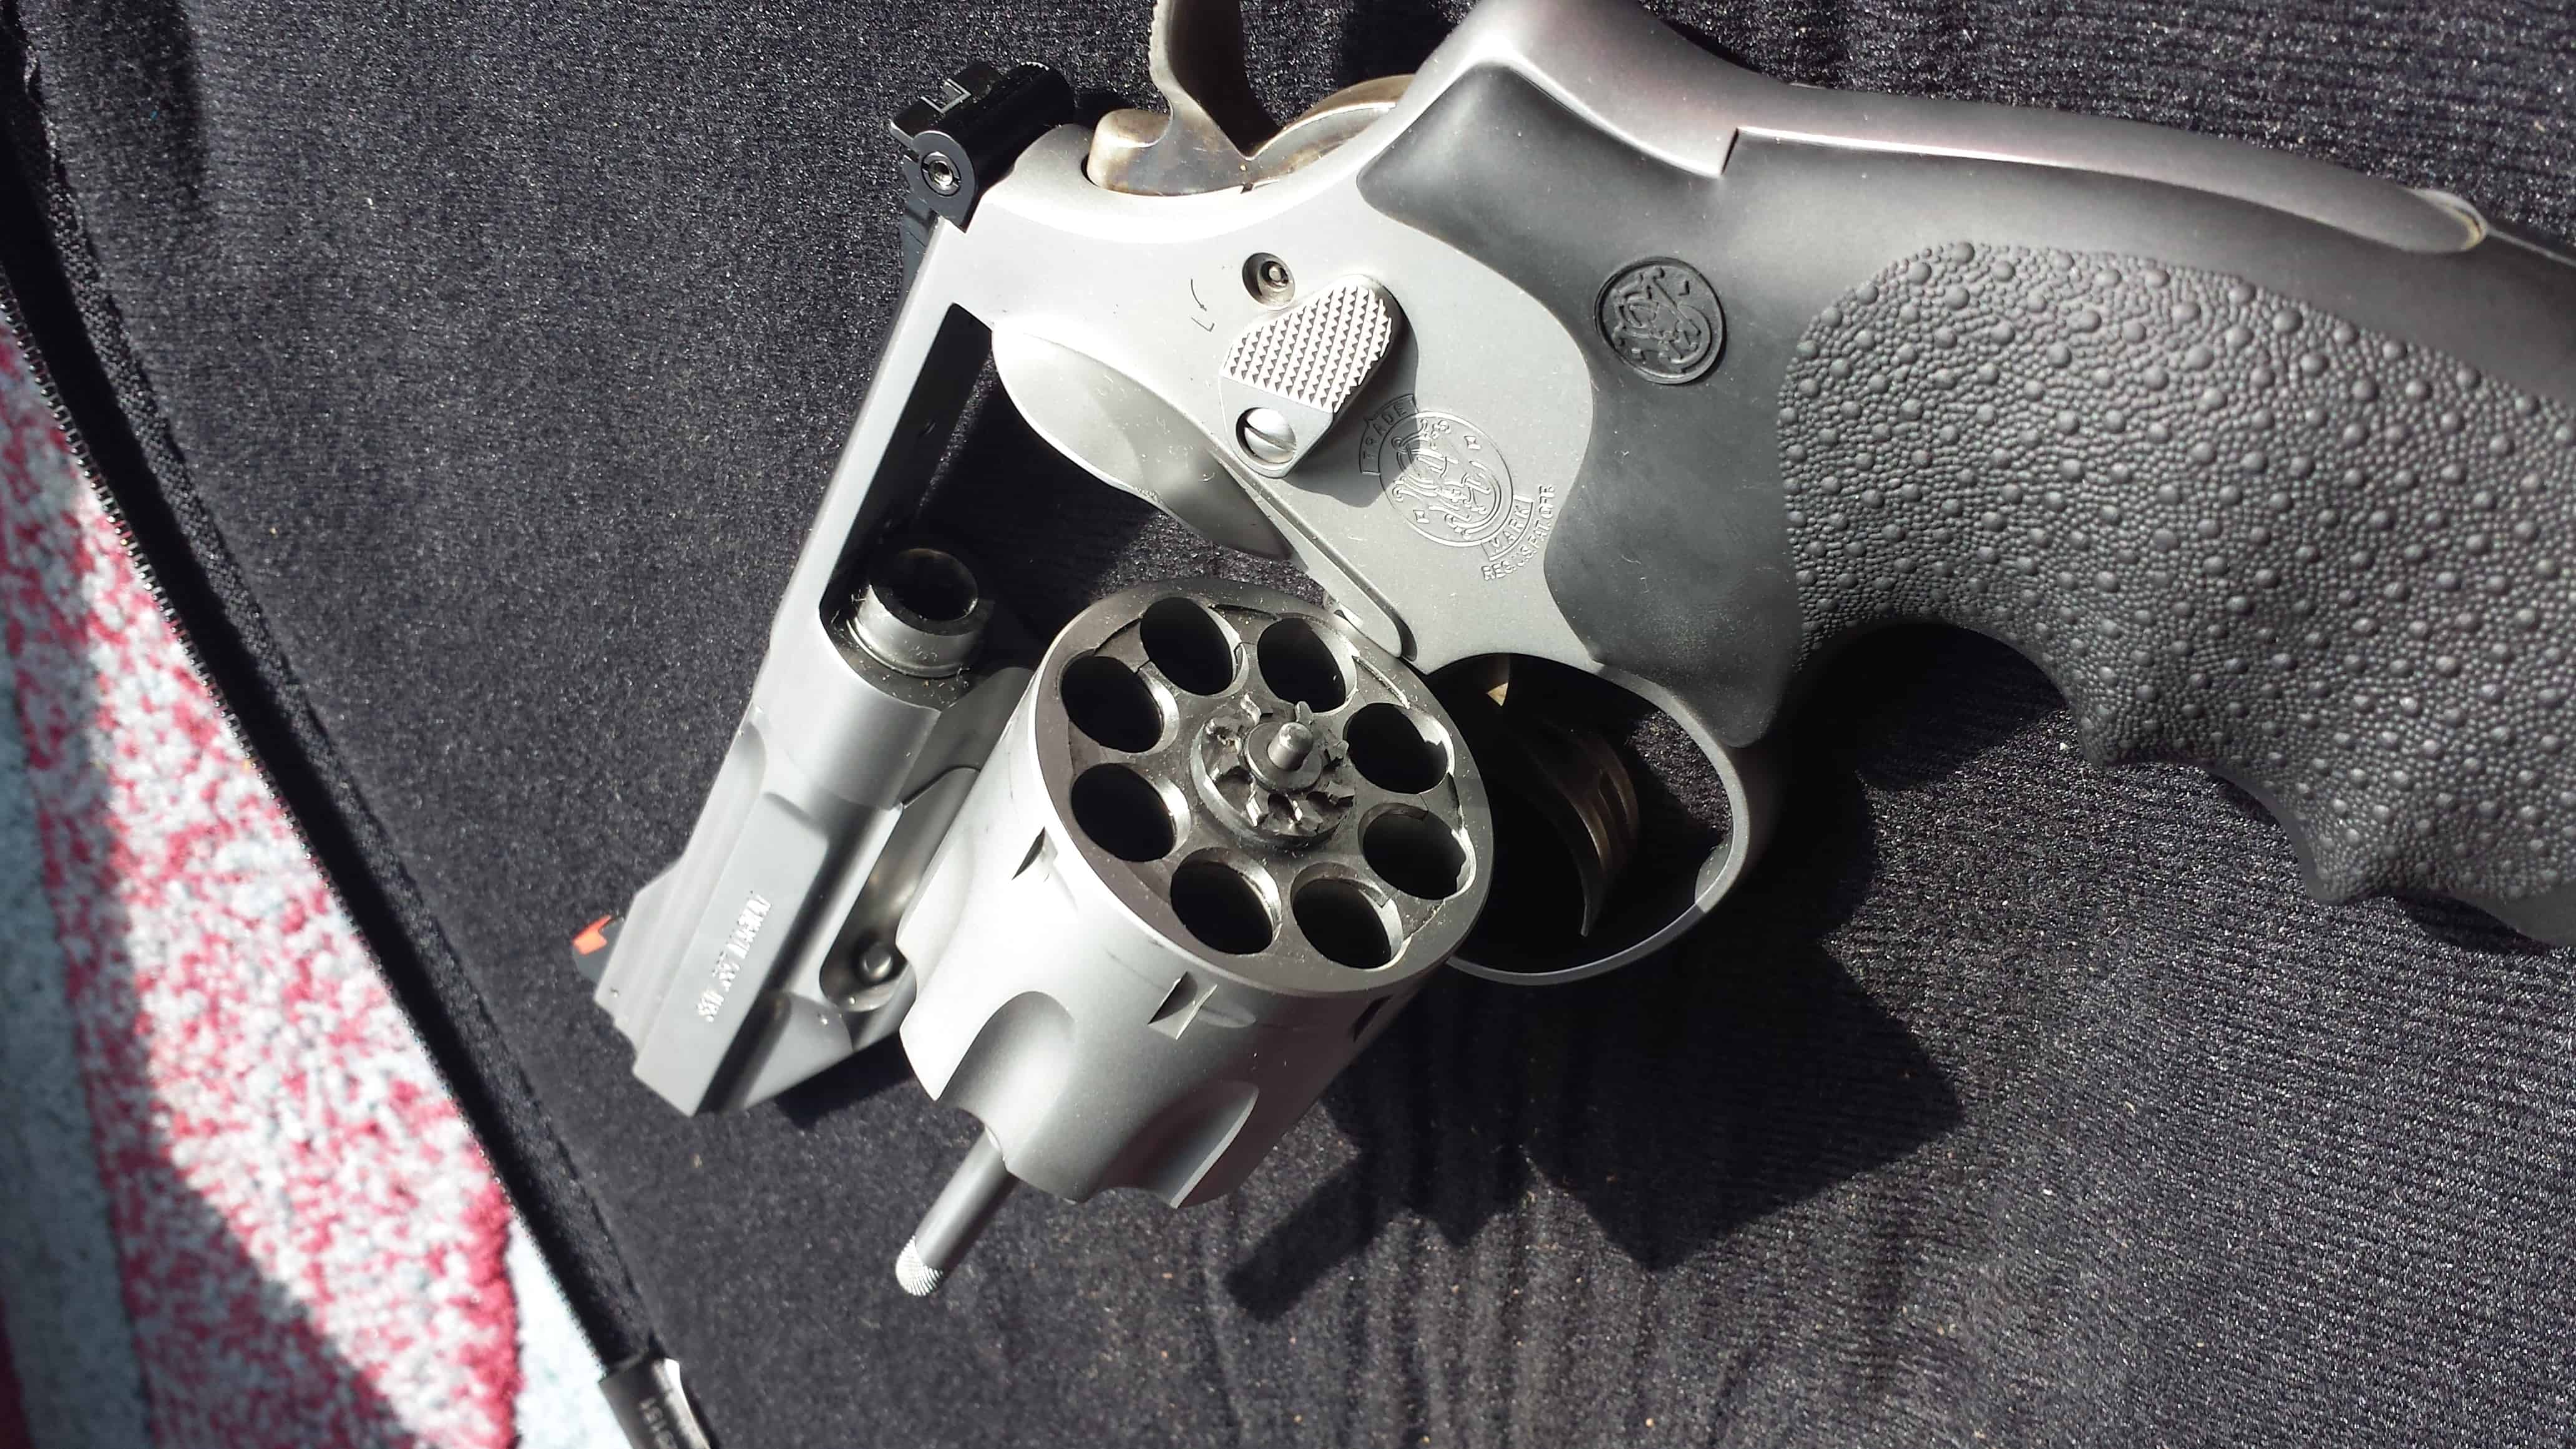 smith and wesson 627